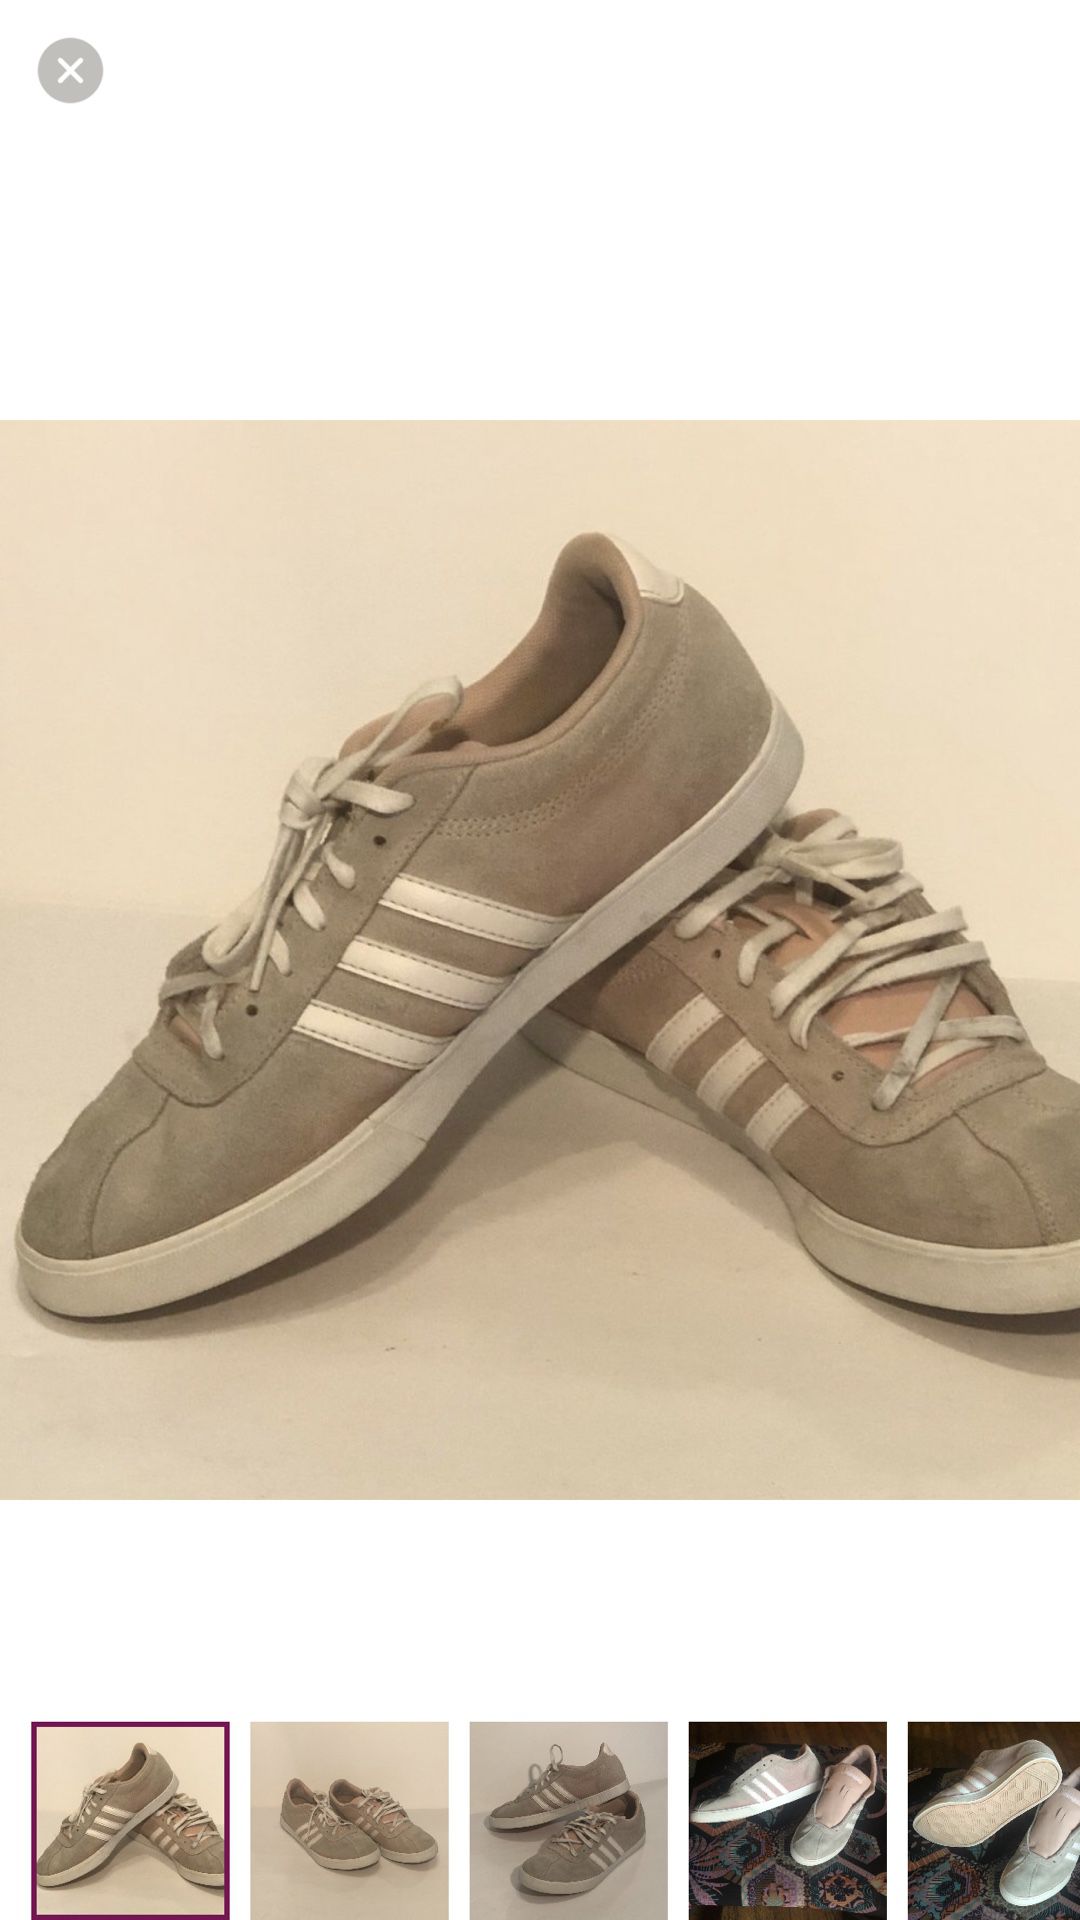 Adidas. Canvas Grey Faded Sneakers. Size 8 1/2